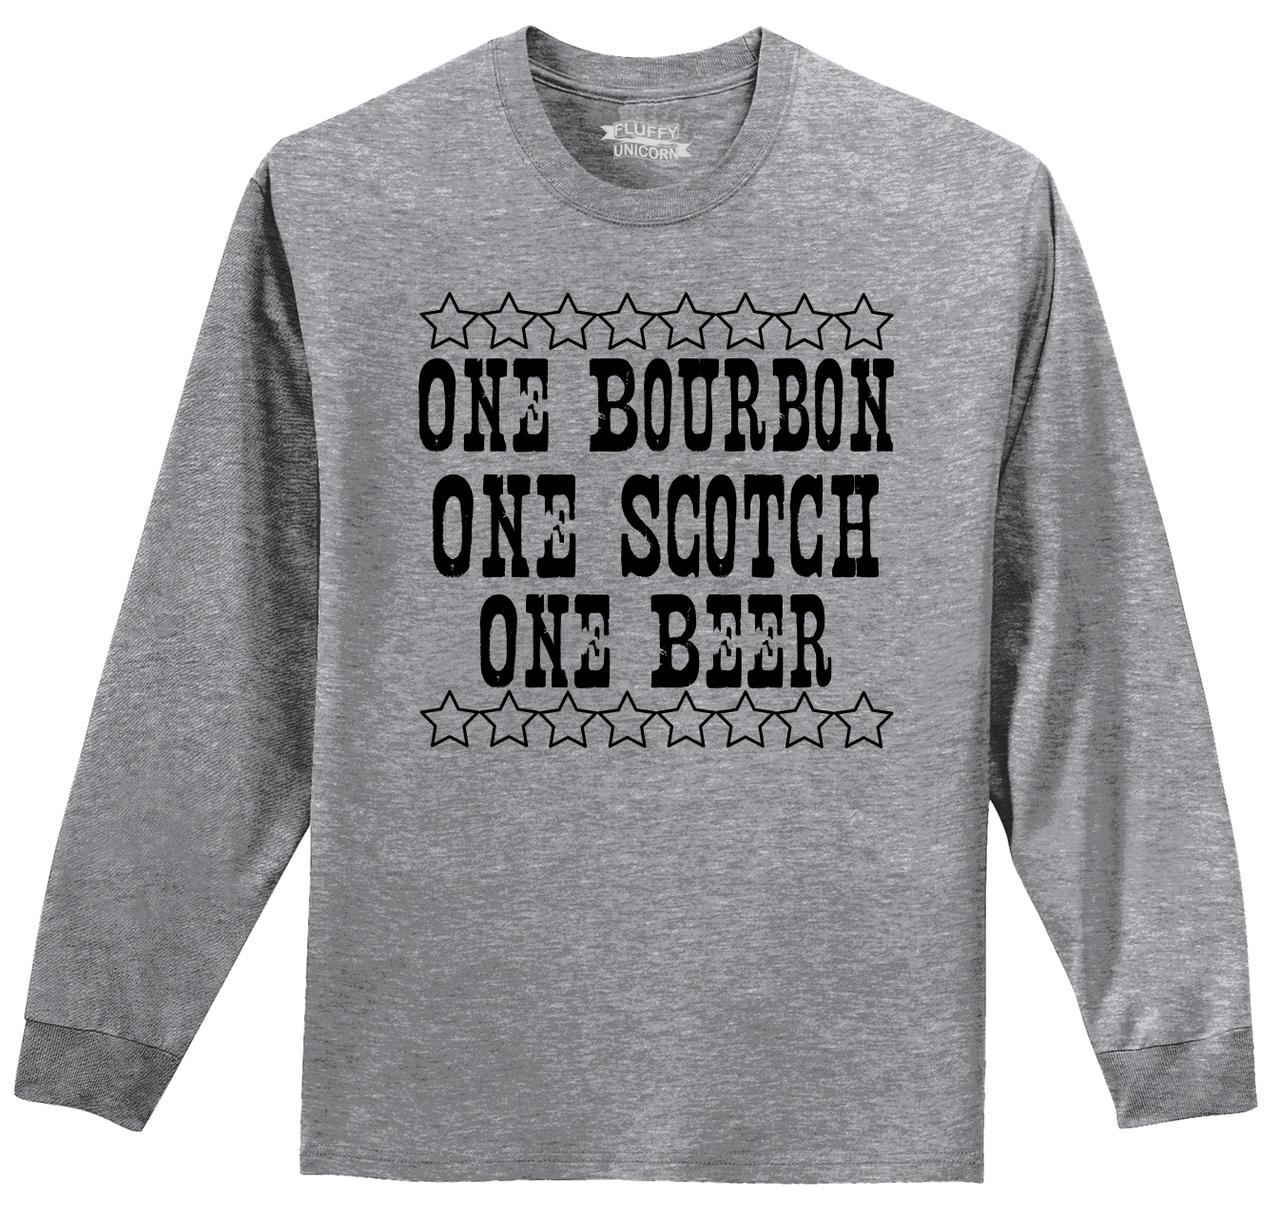 1 Bourbon 1 Scotch 1 Beer T Shirt Single Malt Whisky Whiskey Country Music Tee